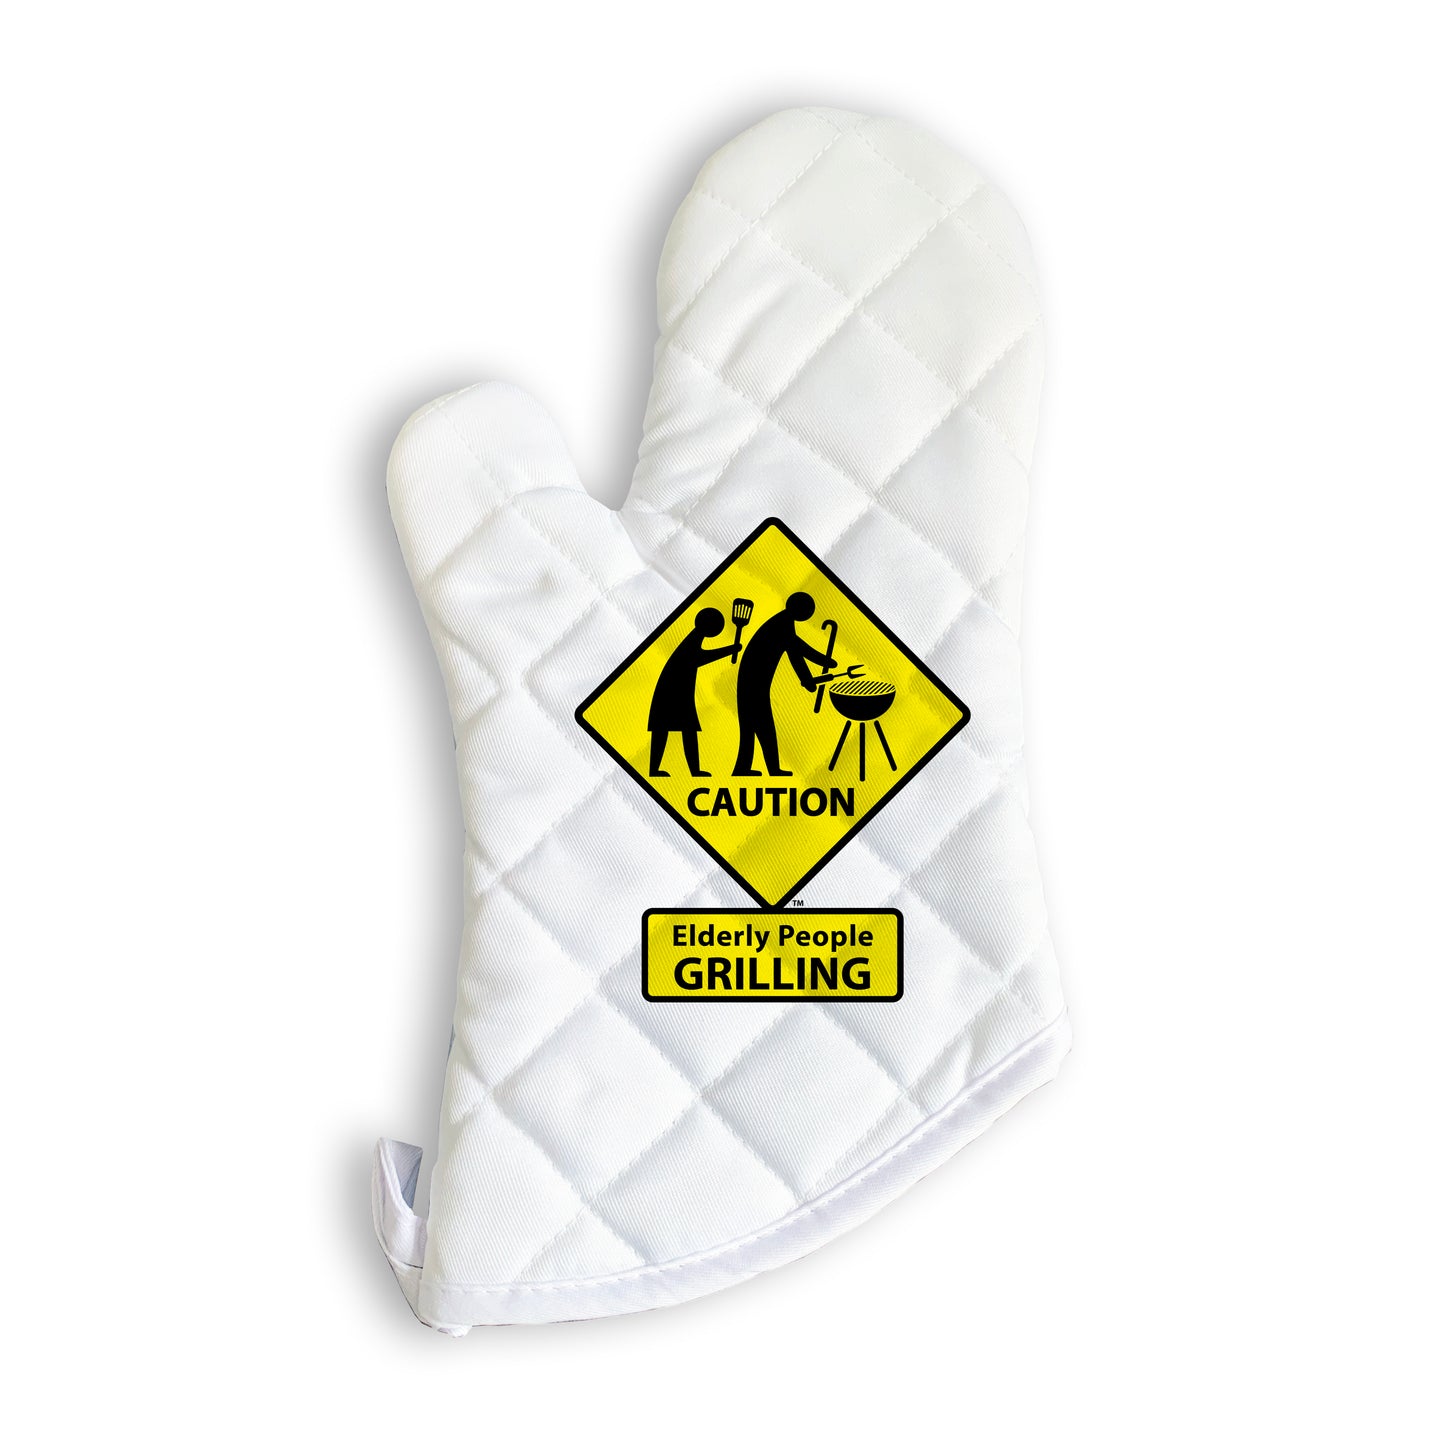 CAUTION: Elderly People GRILLING Oven Mitt & Hot Pad